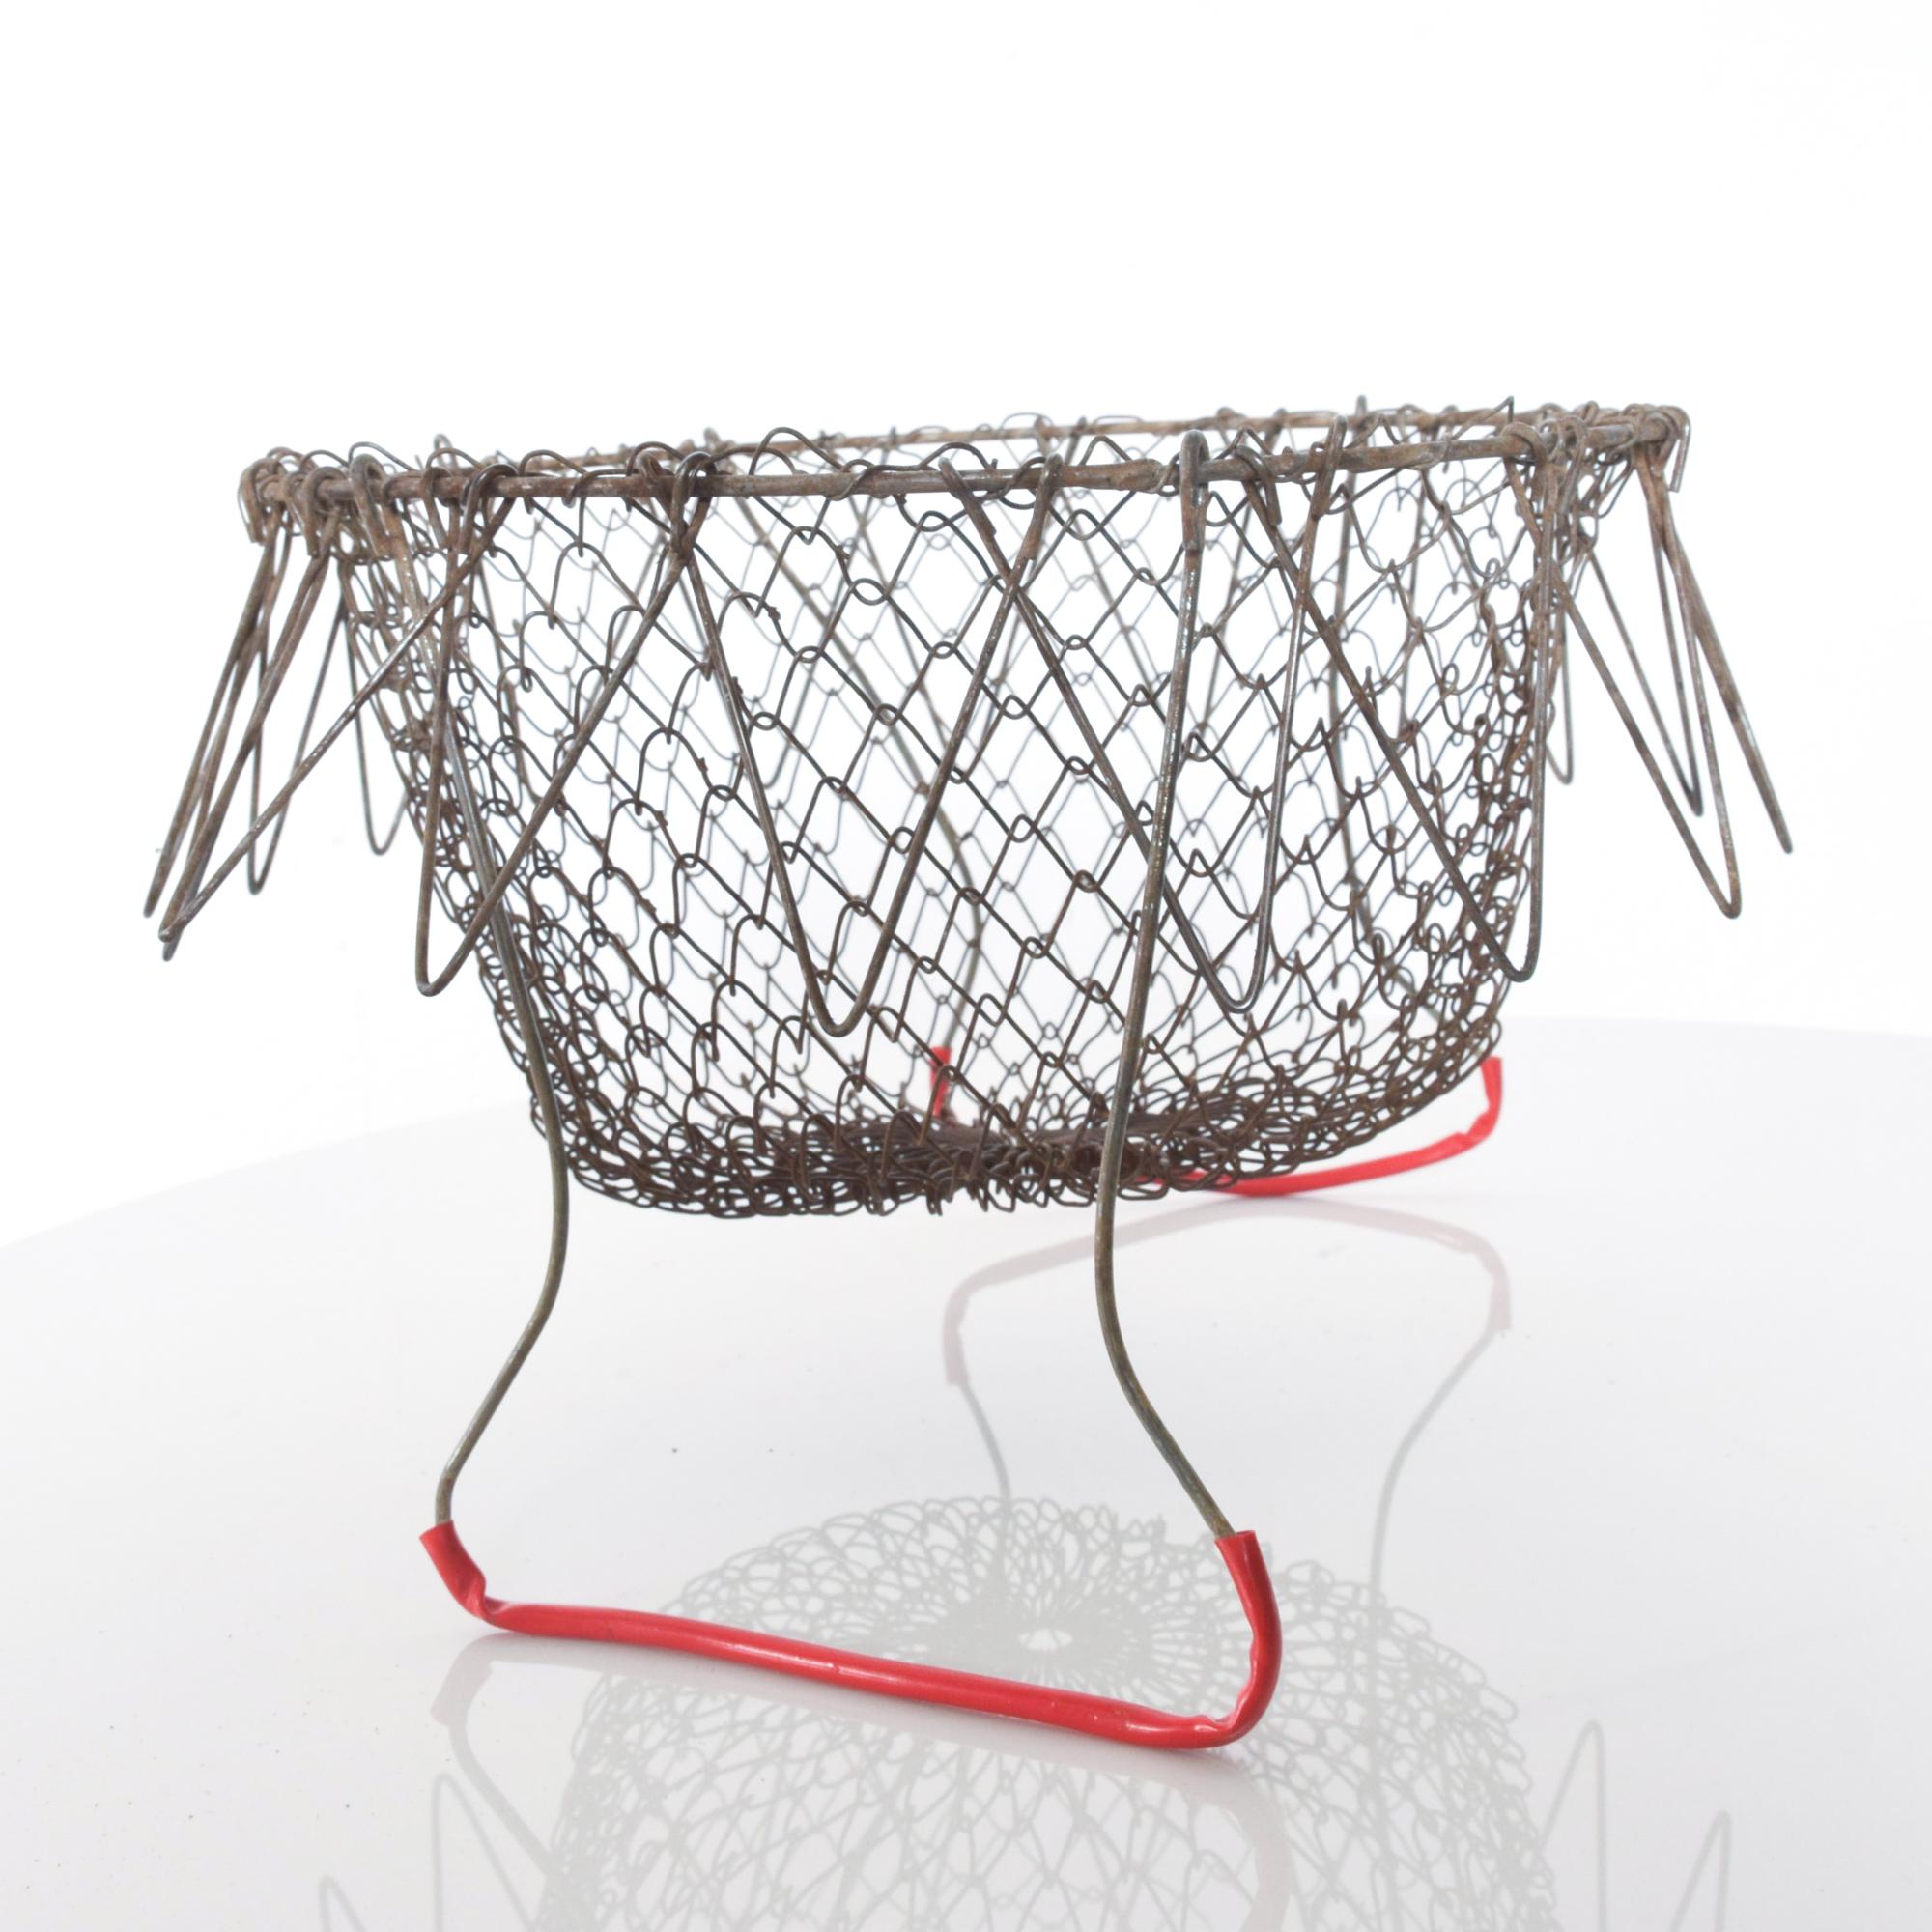 Collapsible red handled antique egg basket wire carryall intricate pattern 
mesh grid
Perfect for egg collecting or as a decorative accessory.
Measures: 8 1/2